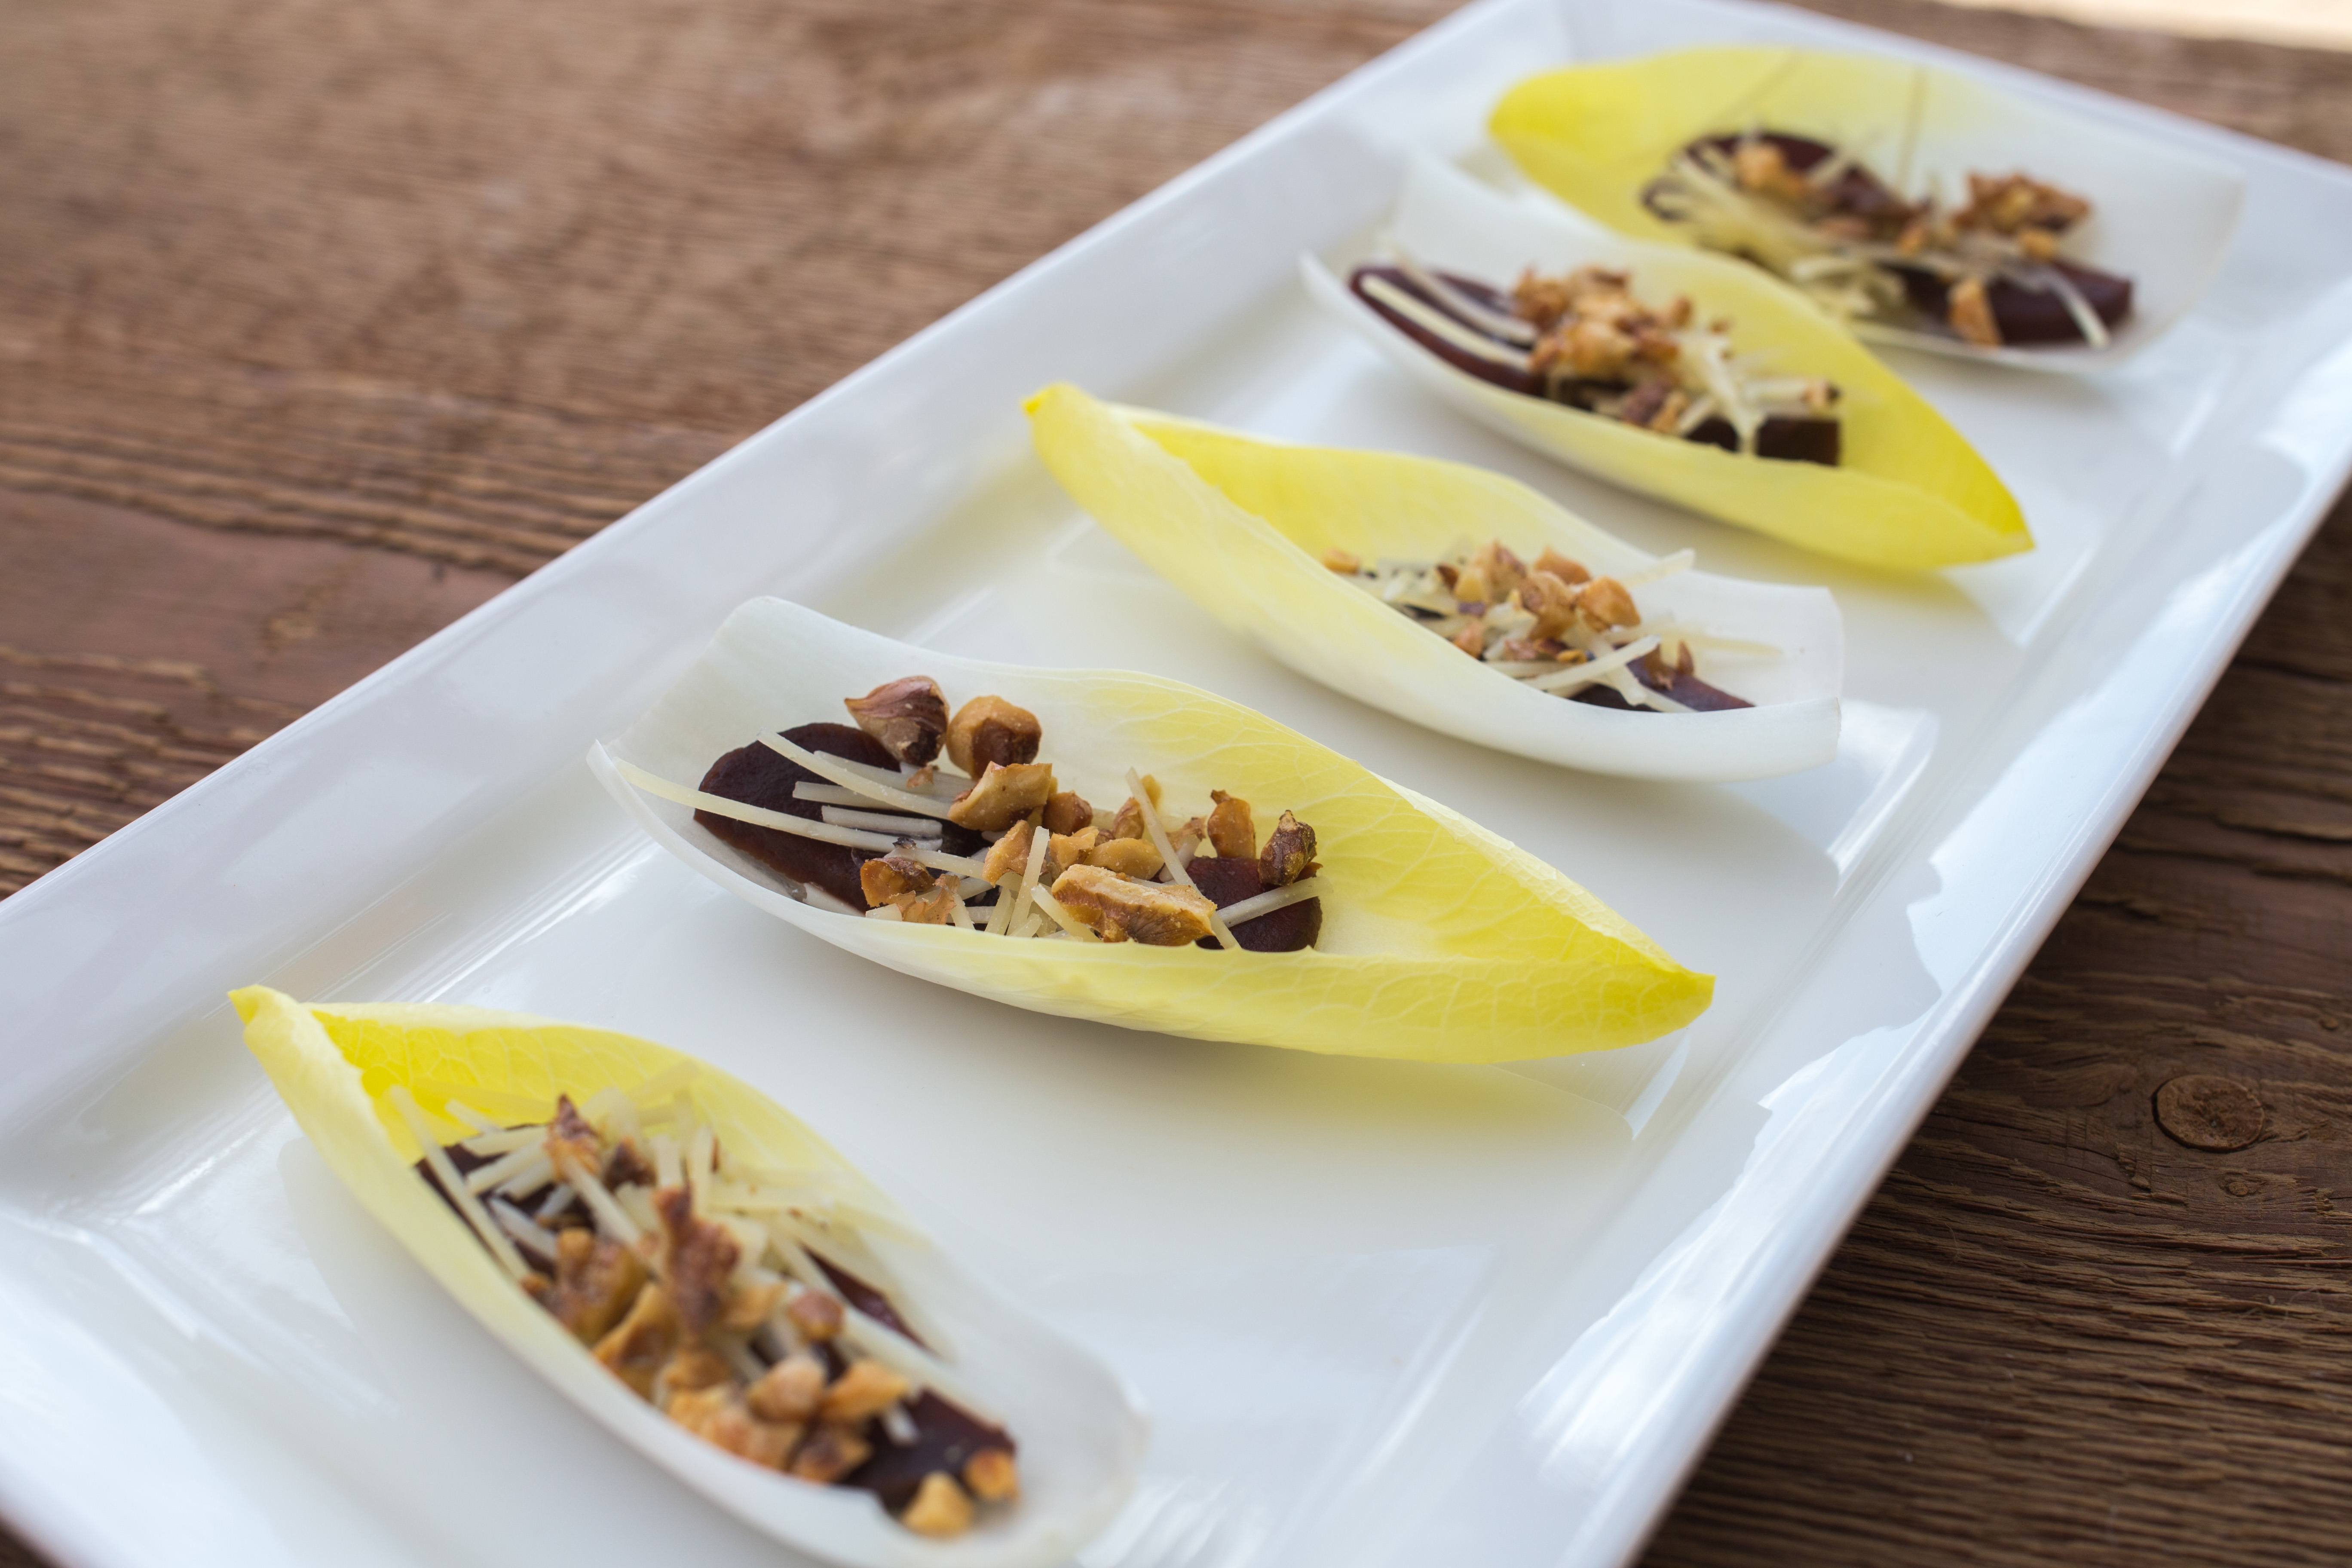 Endive with Beets, Parmesan & Walnuts